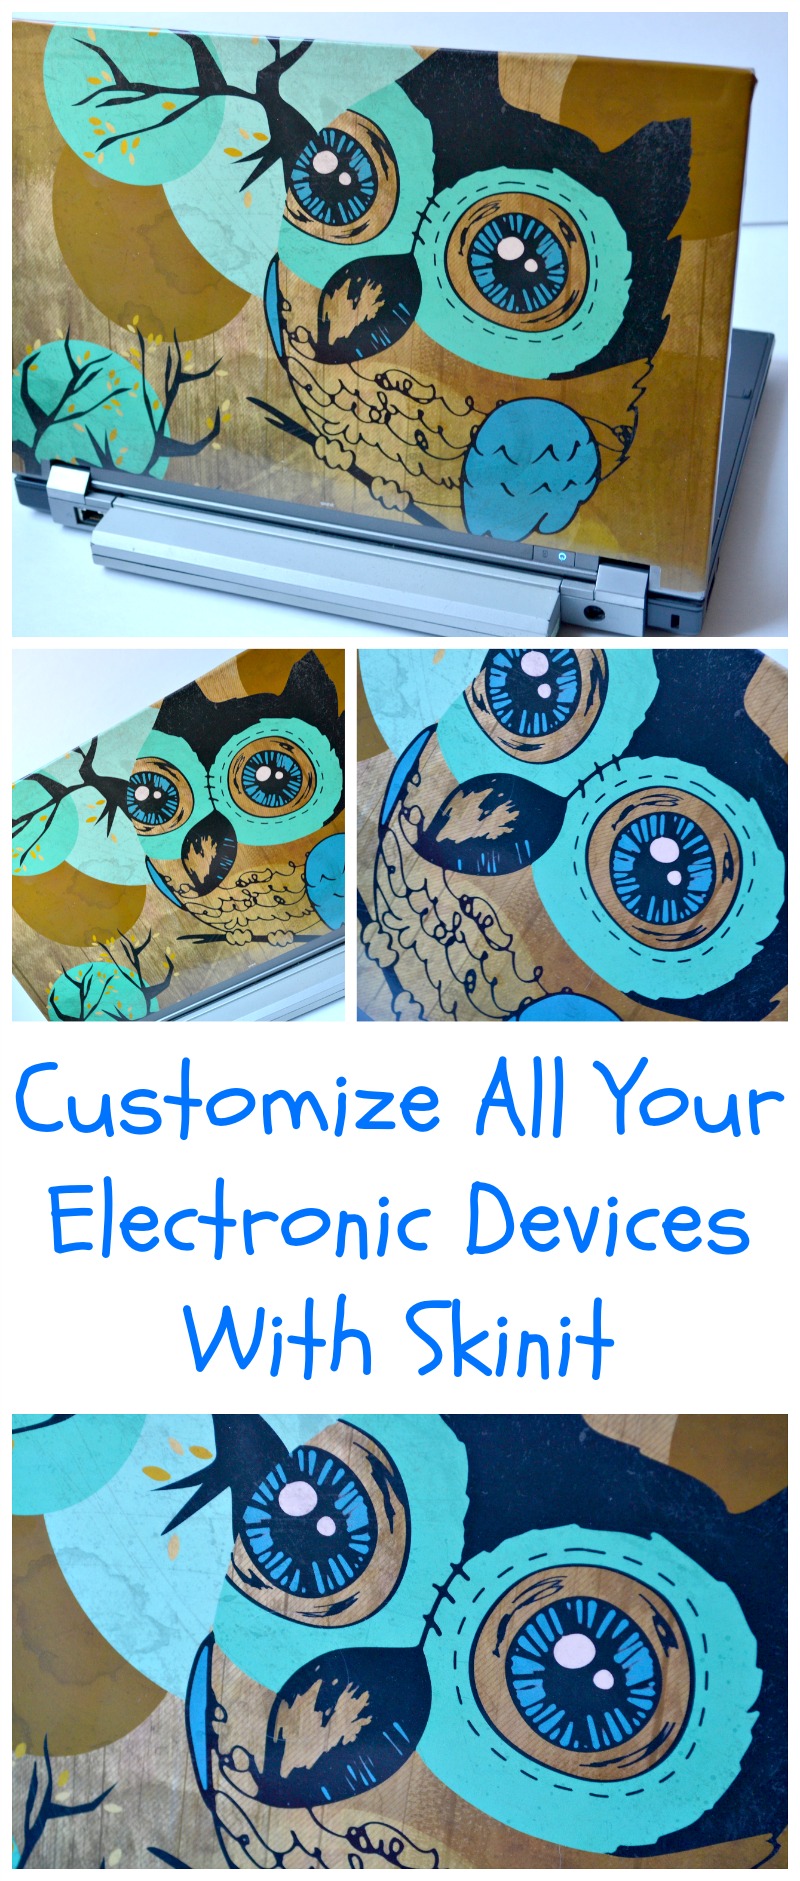 Customize All Your Electronic Devices With Skinit